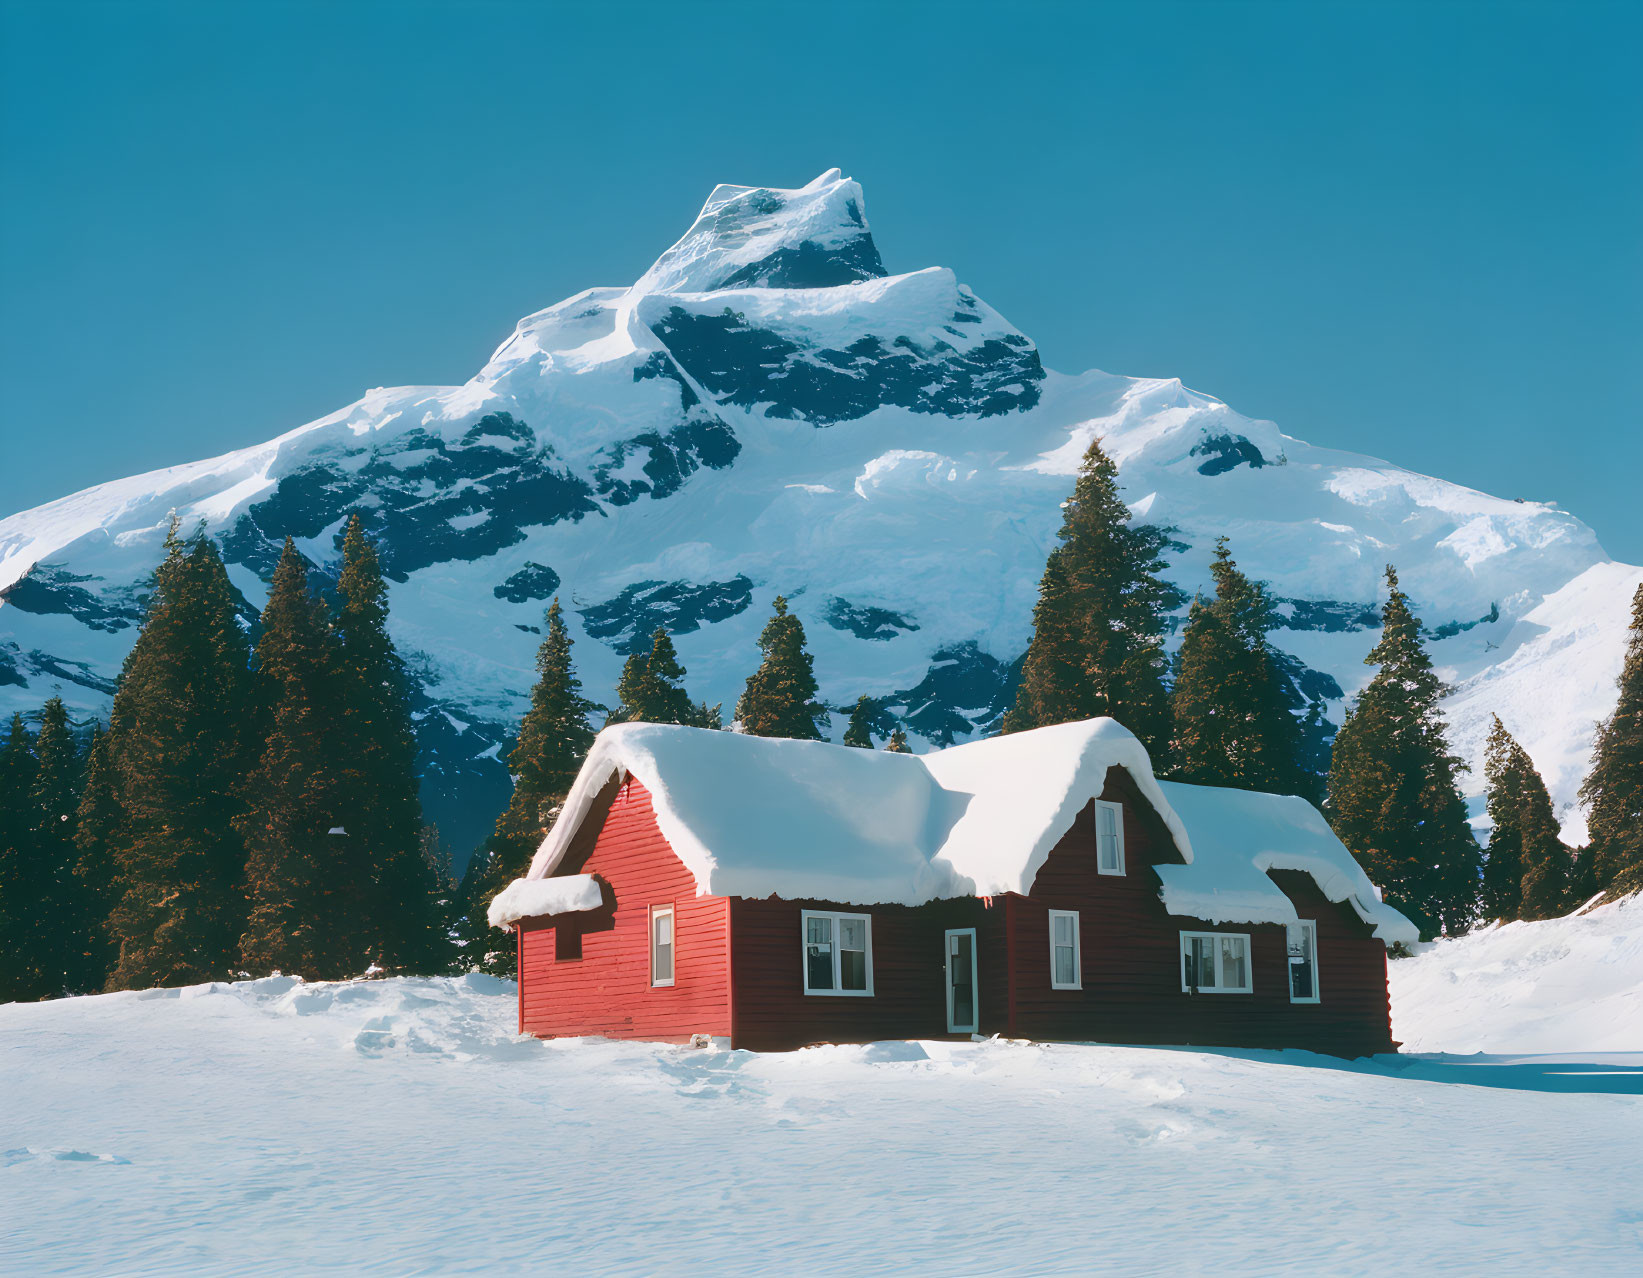 Snowy mountain landscape with red cabin and evergreens